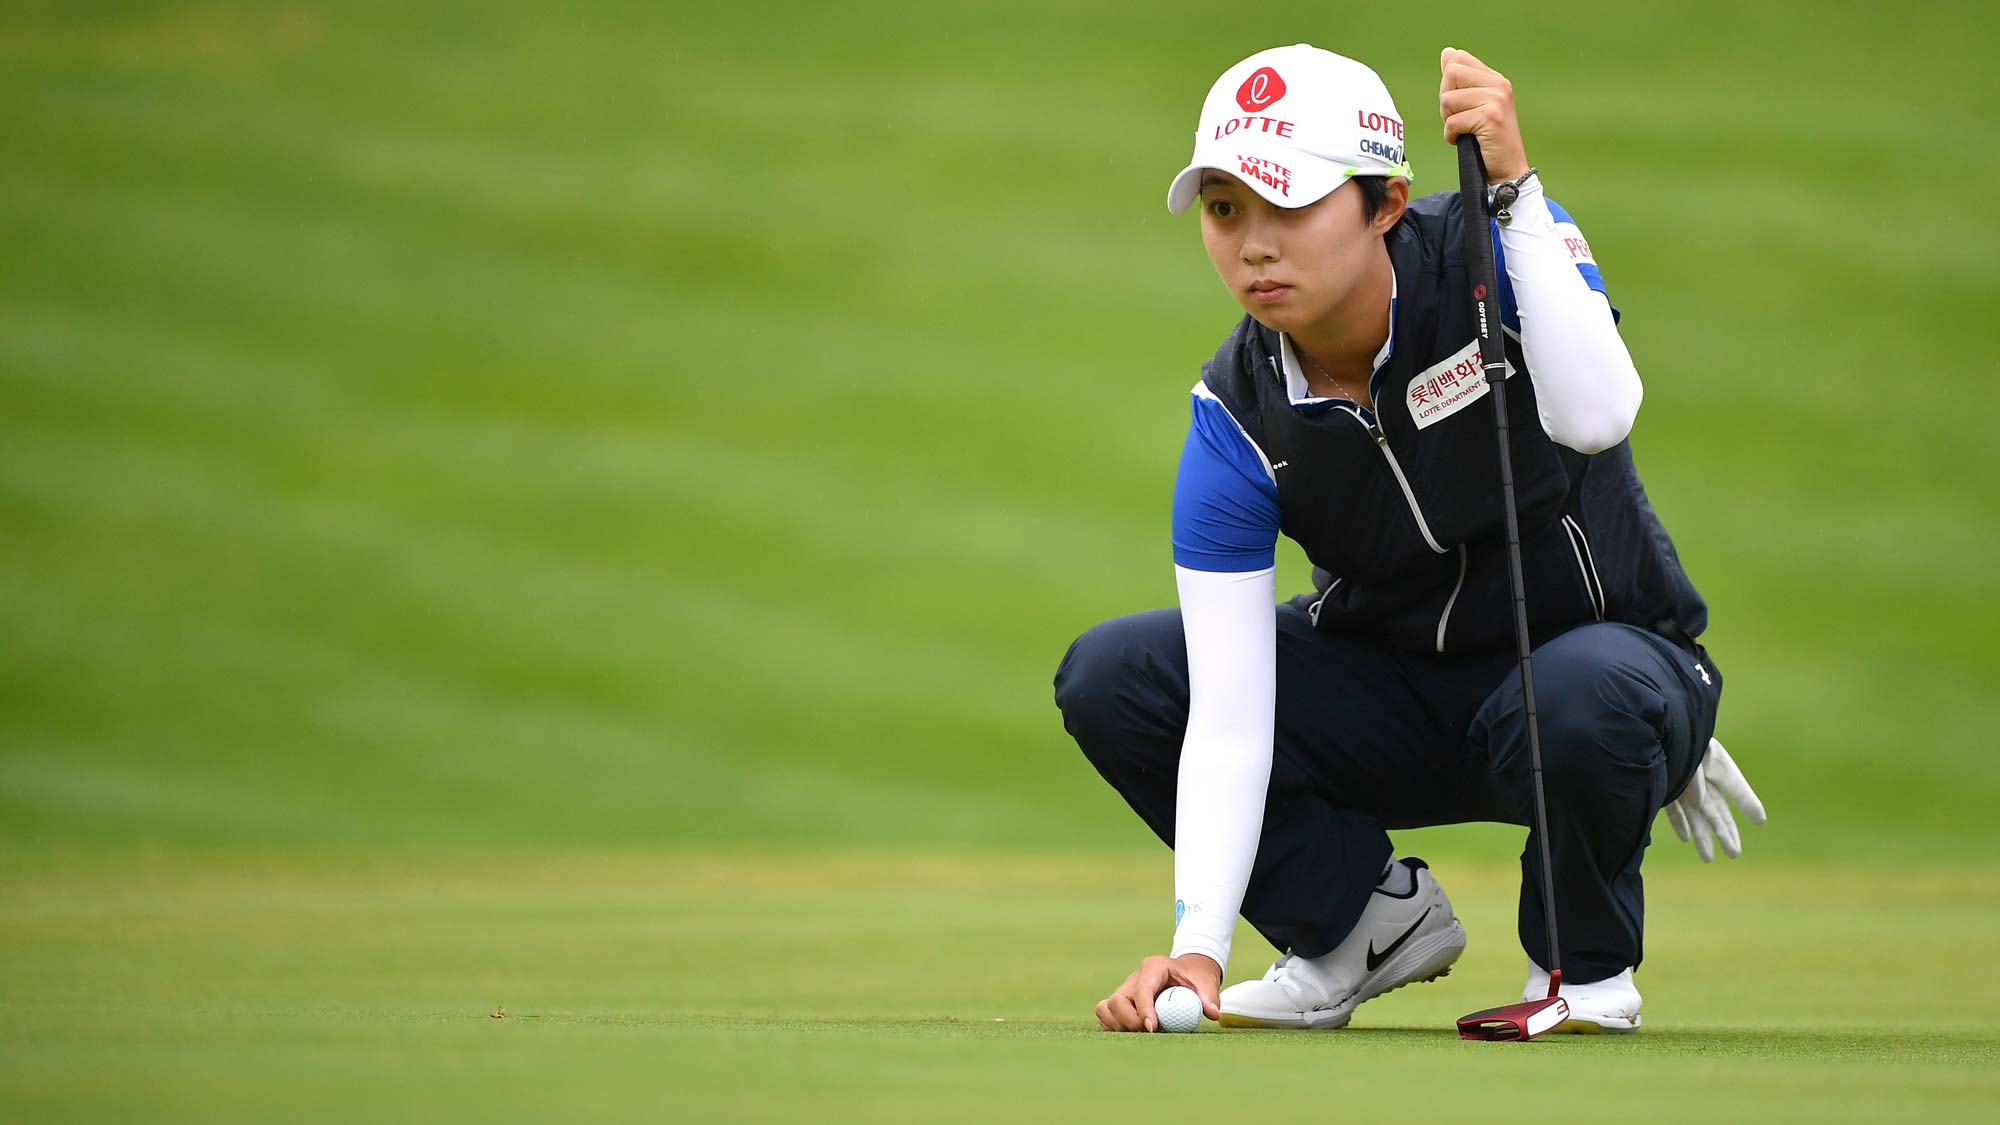 Hyo Joo Kim of South Korea lines up her putt on the 13th green during day 4 of the Evian Championship